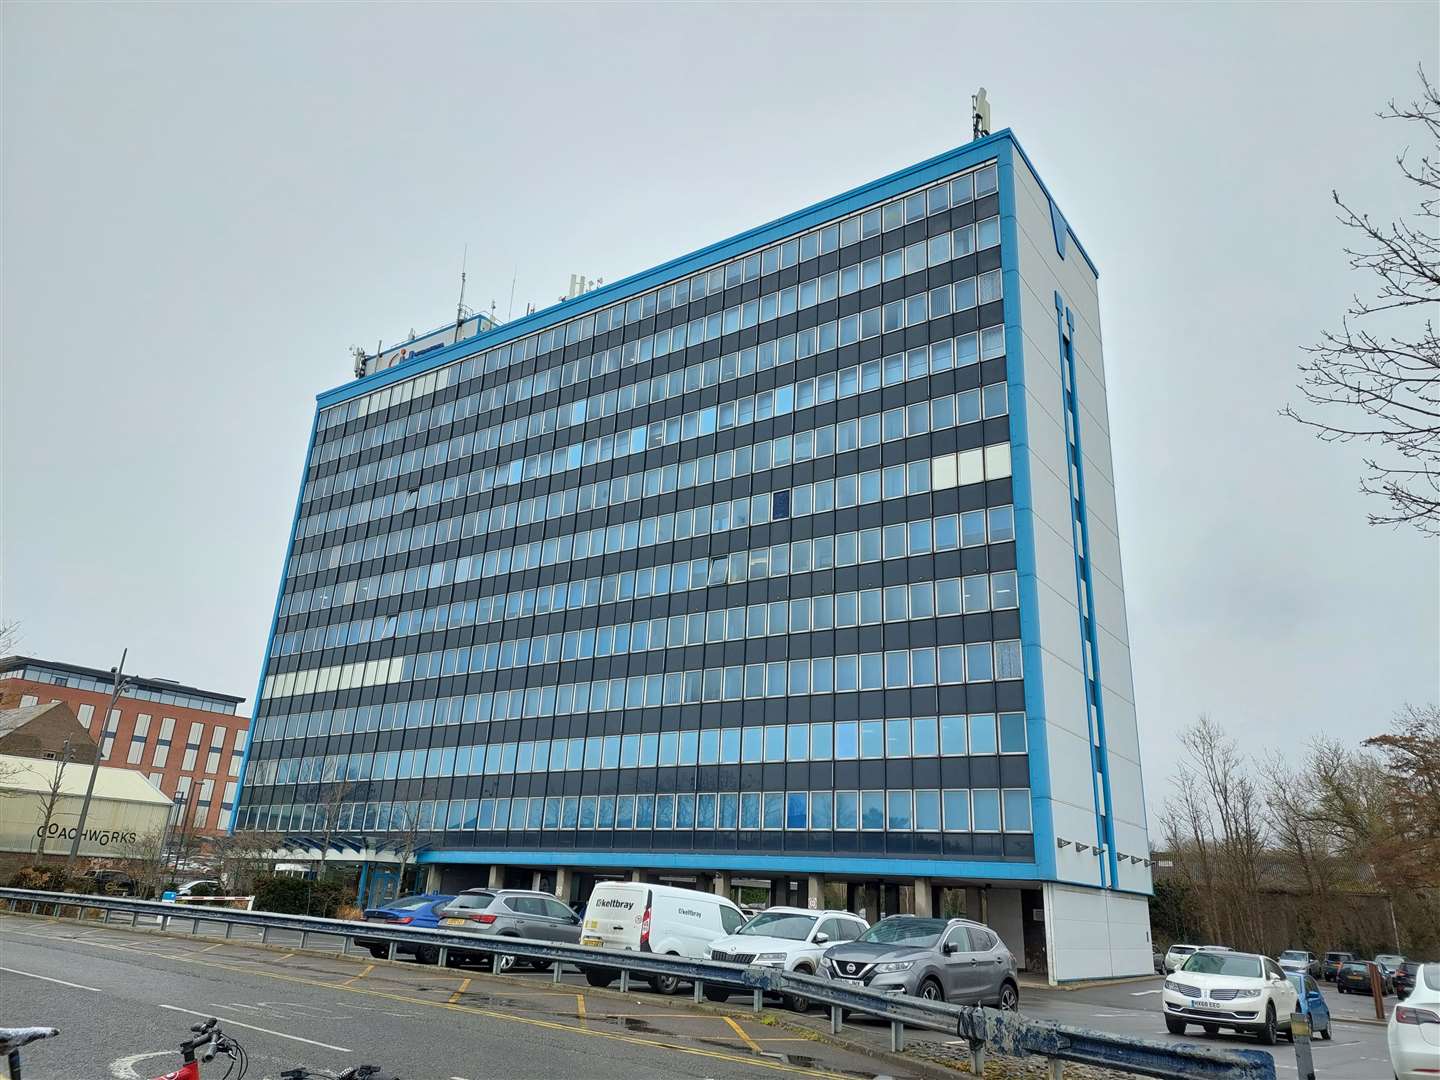 Ashford Borough Council will relocate its headquarters to International House